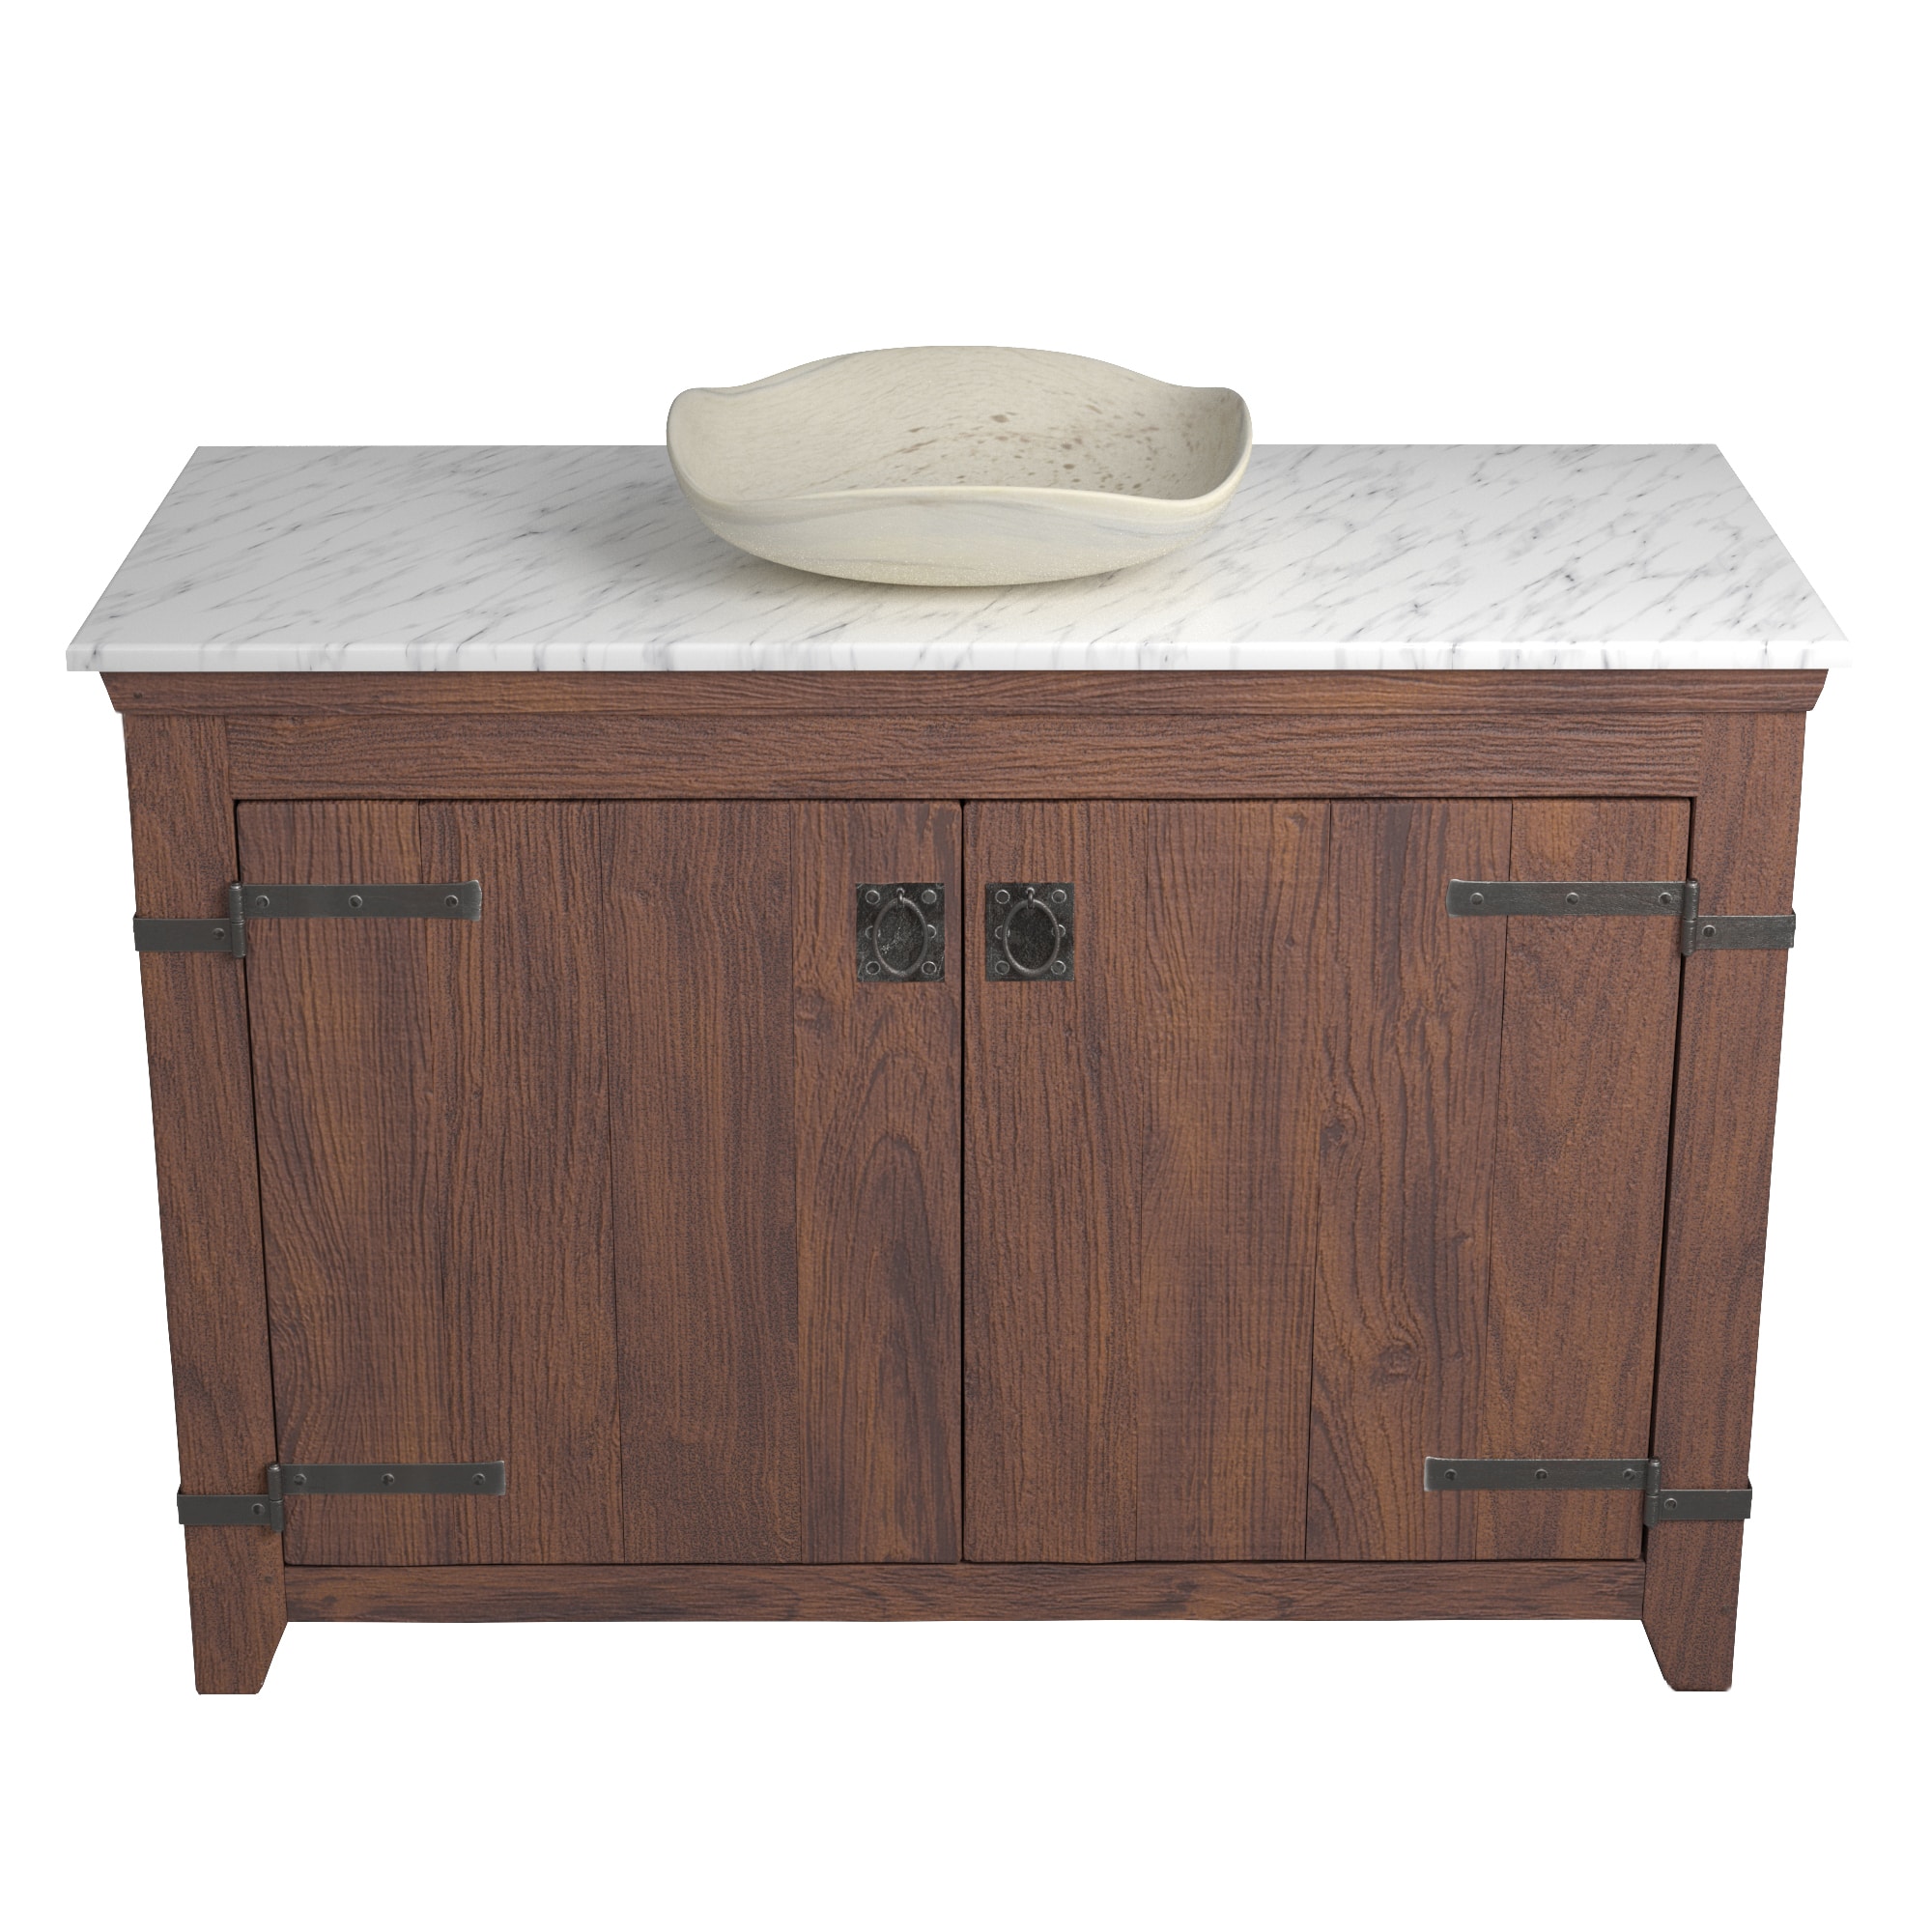 Native Trails 48" Americana Vanity in Chestnut with Carrara Marble Top and Lido in Beachcomber, Single Faucet Hole, BND48-VB-CT-MG-019